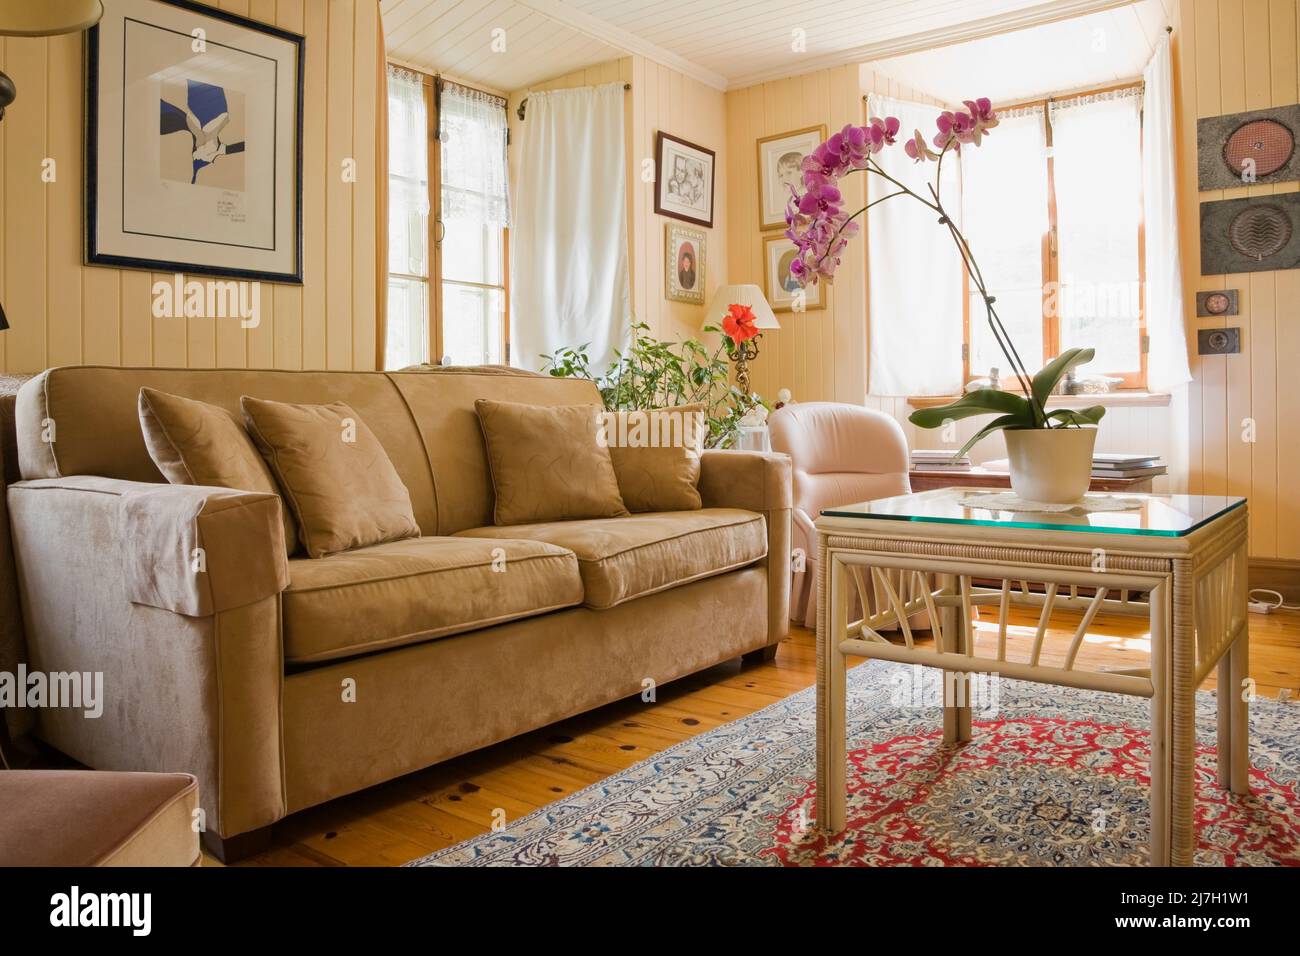 Tan upholstered sofa, armchair, wicker table with glass top and blue and red weaved rug in living room inside old 1746 home. Stock Photo